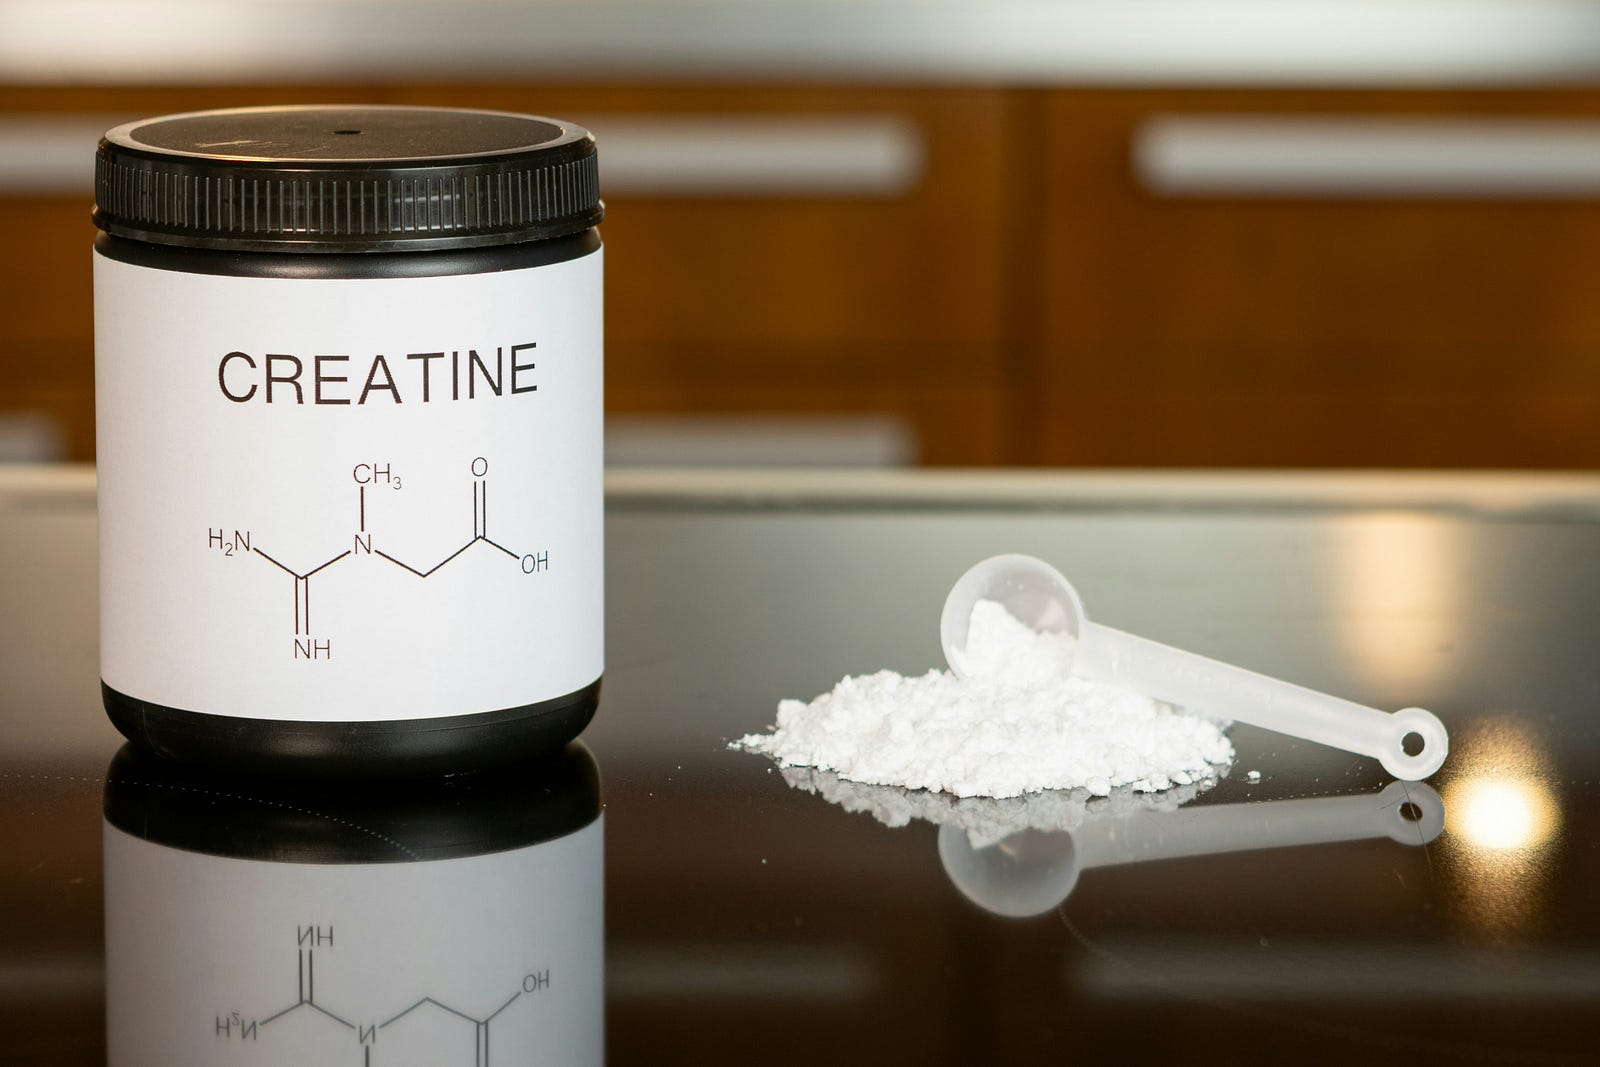 A bottle of creatine on the left, with white powder and a small spoon on the right.